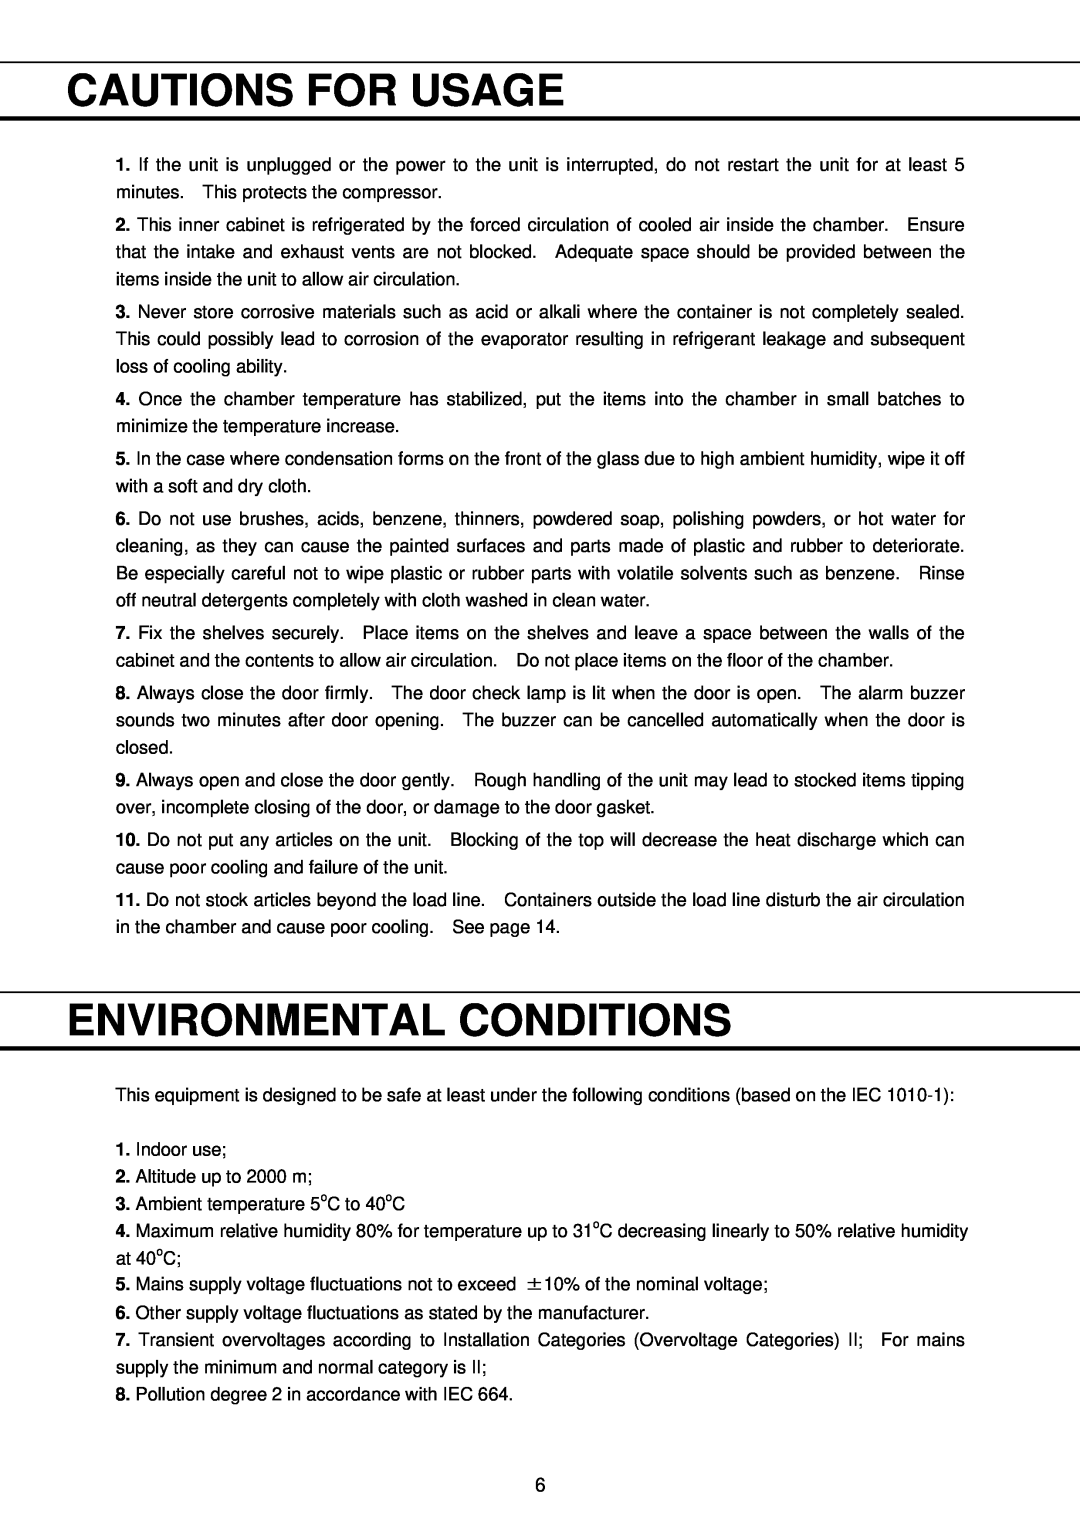 Sanyo MBR-704GR instruction manual Cautions For Usage, Environmental Conditions 